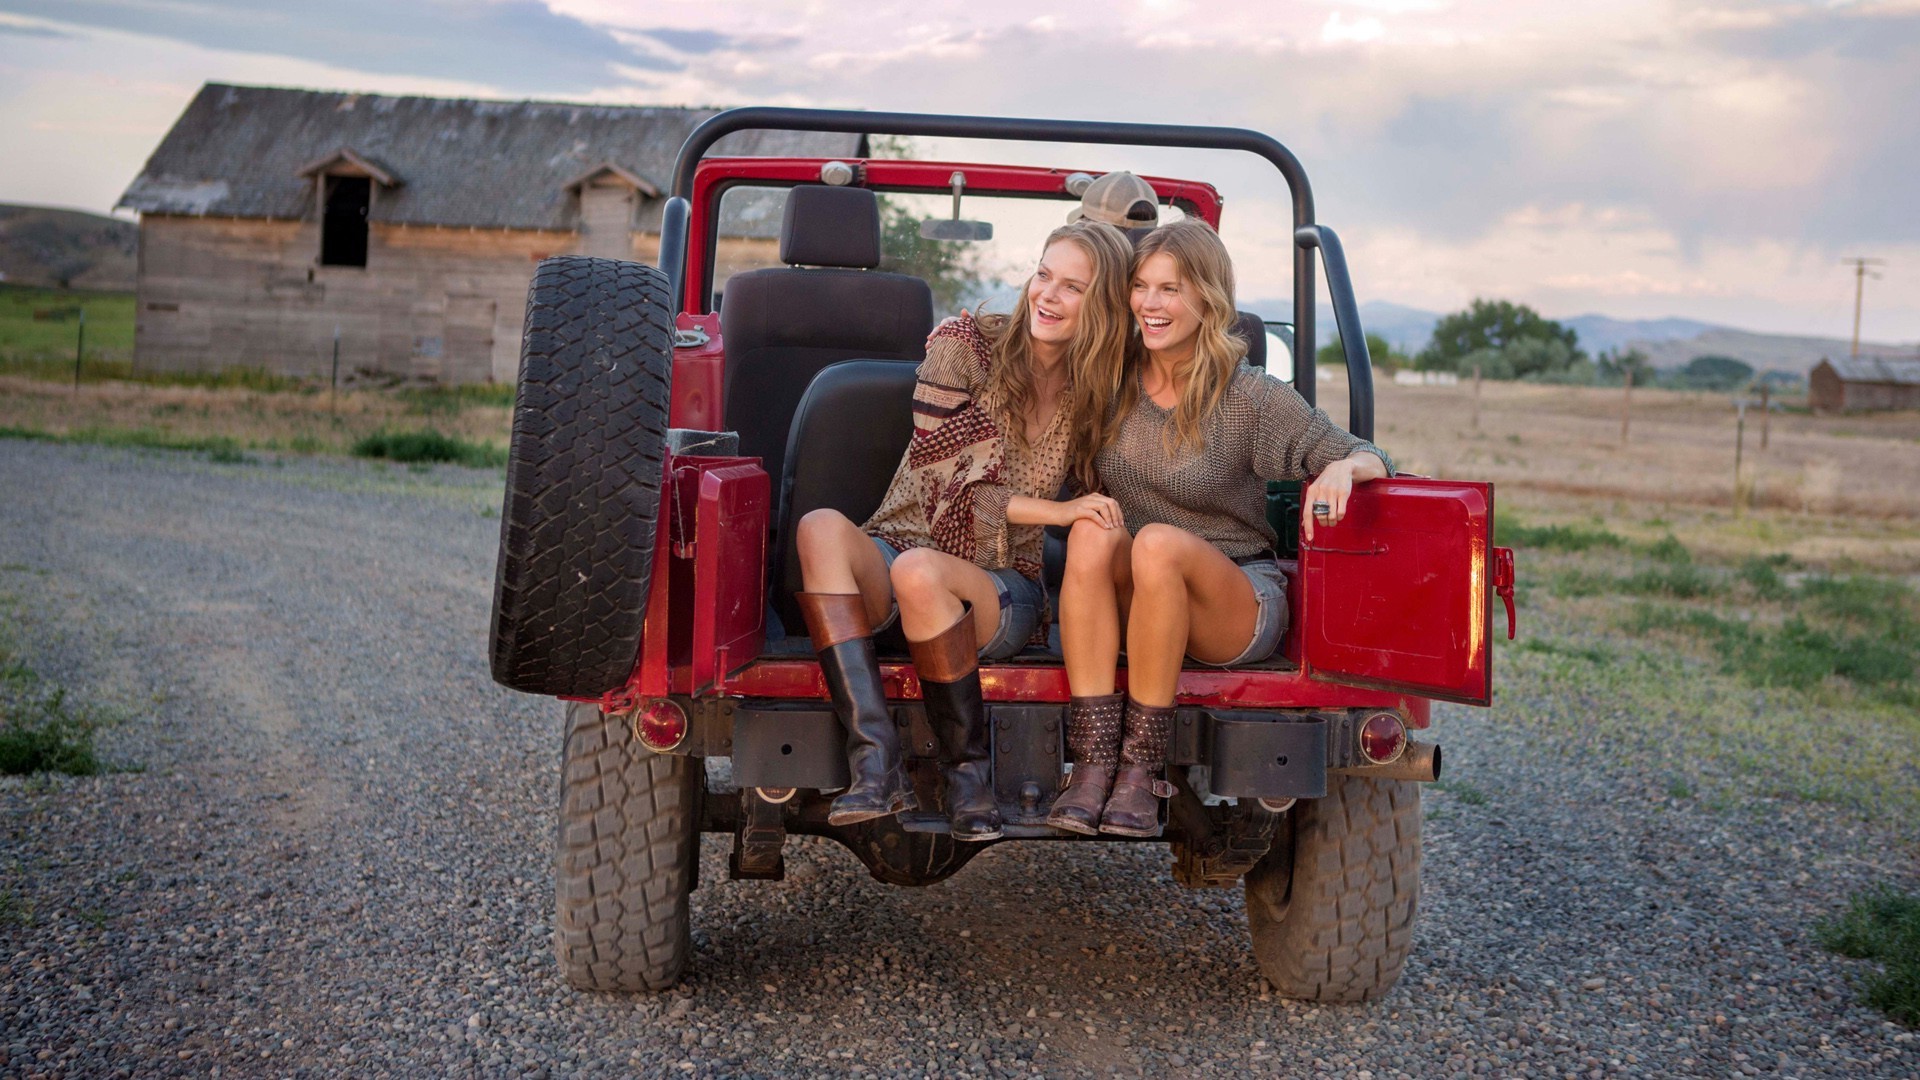 Nicole Boerner Blonde Blue Eyes Jeep Sitting Boots Legs Images, Photos, Reviews